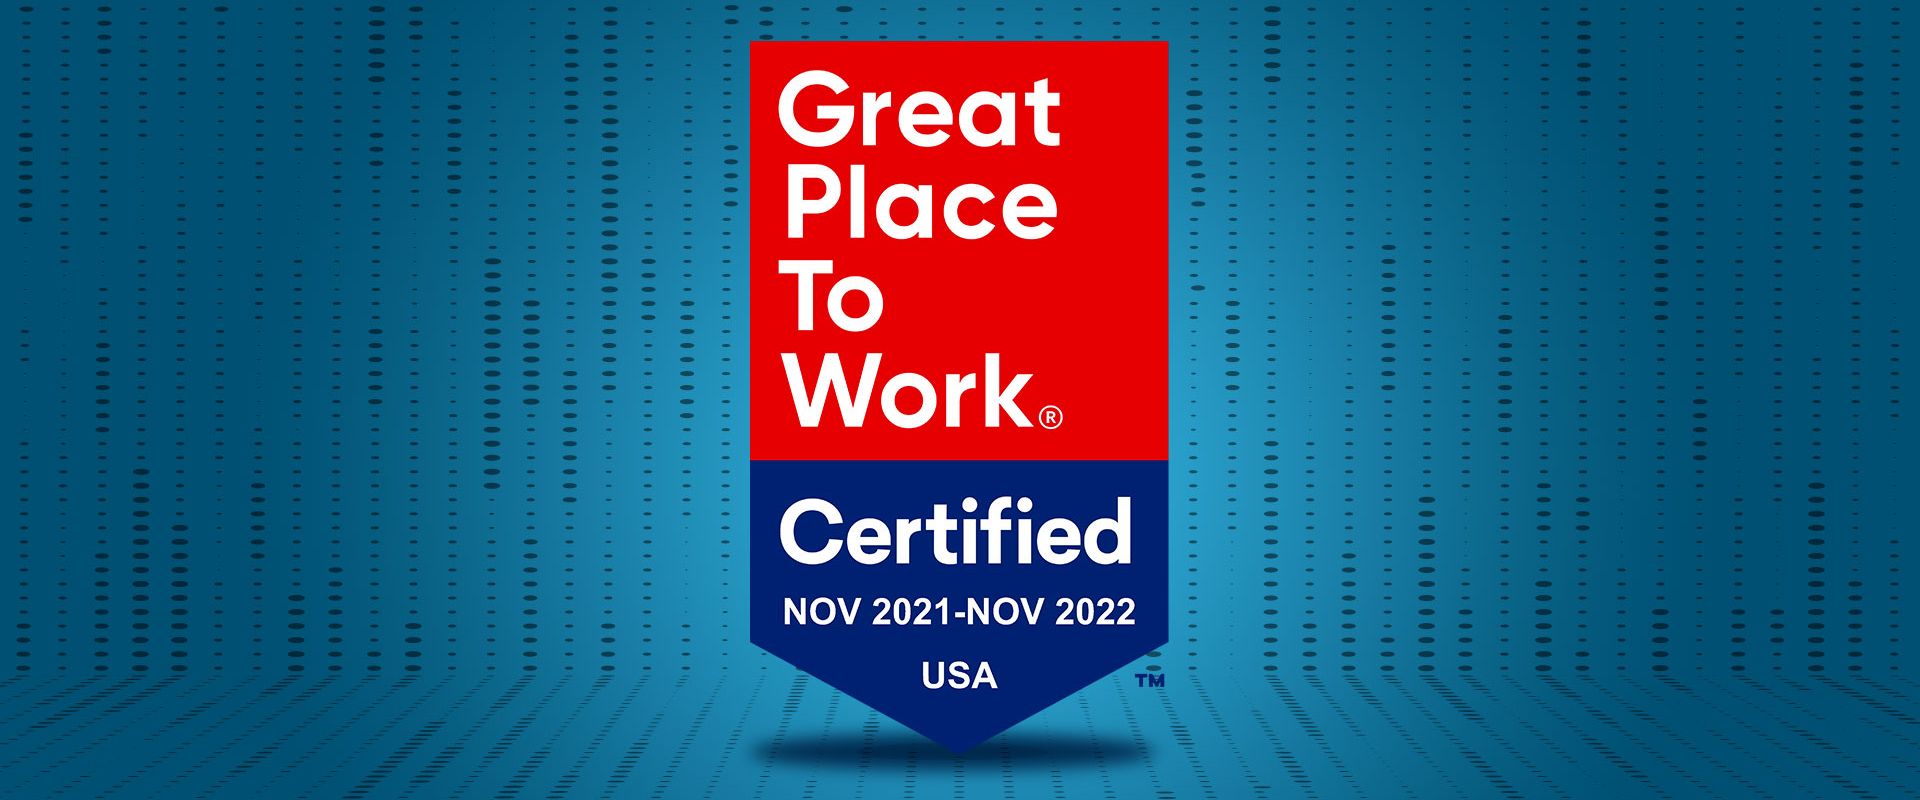 A Great Place to Work Certified award banner